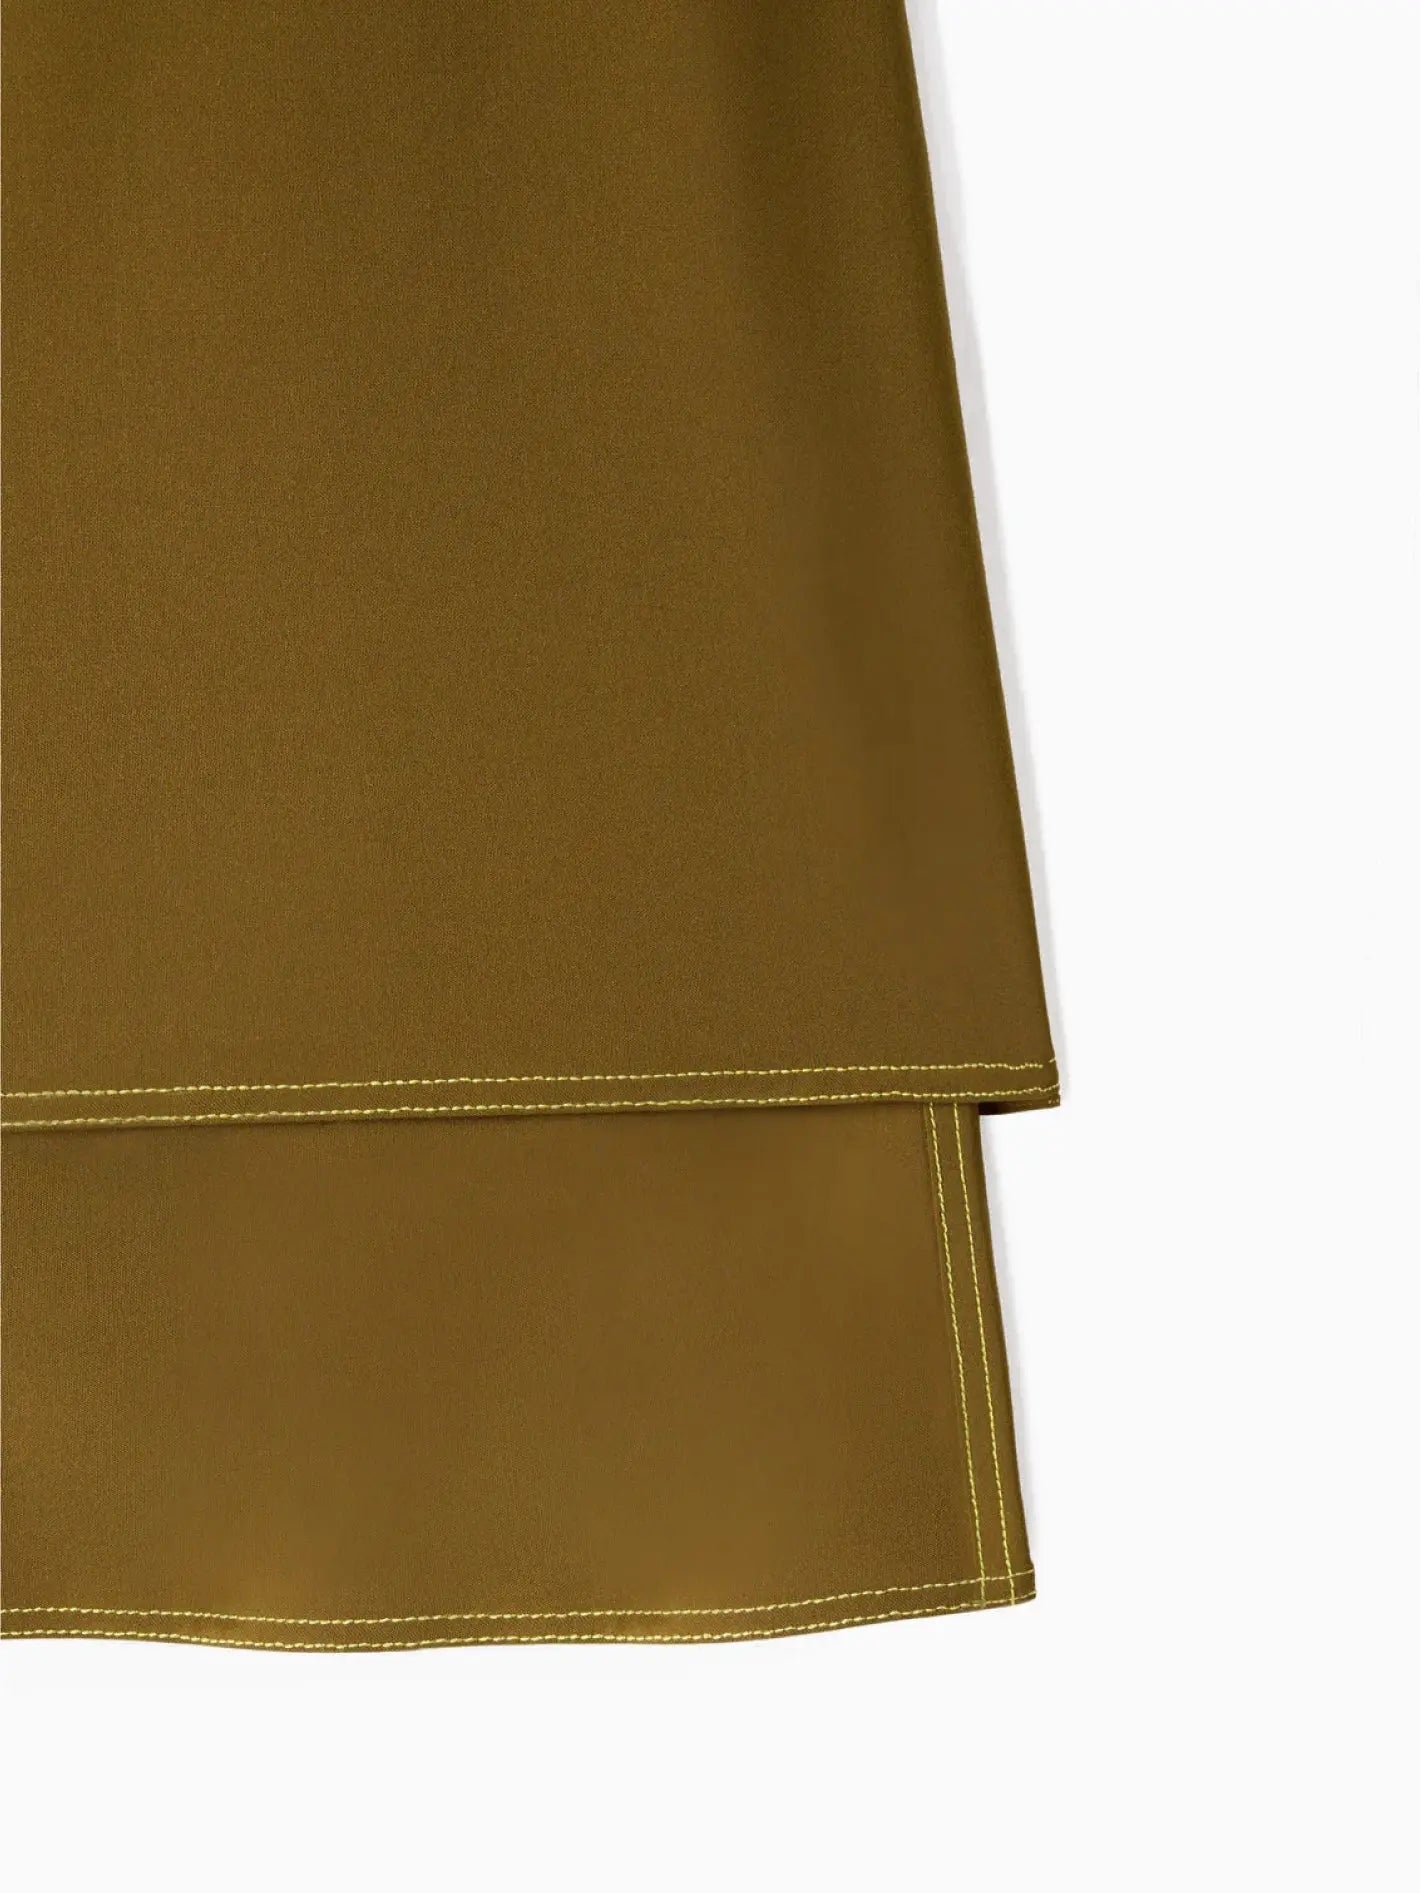 A Panta Skirt Olive Green by Sunnei is centered against a plain white background. The skirt, available at Bassalstore in Barcelona, has a straight cut, with the top layer ending above the second layer, creating a tiered look.